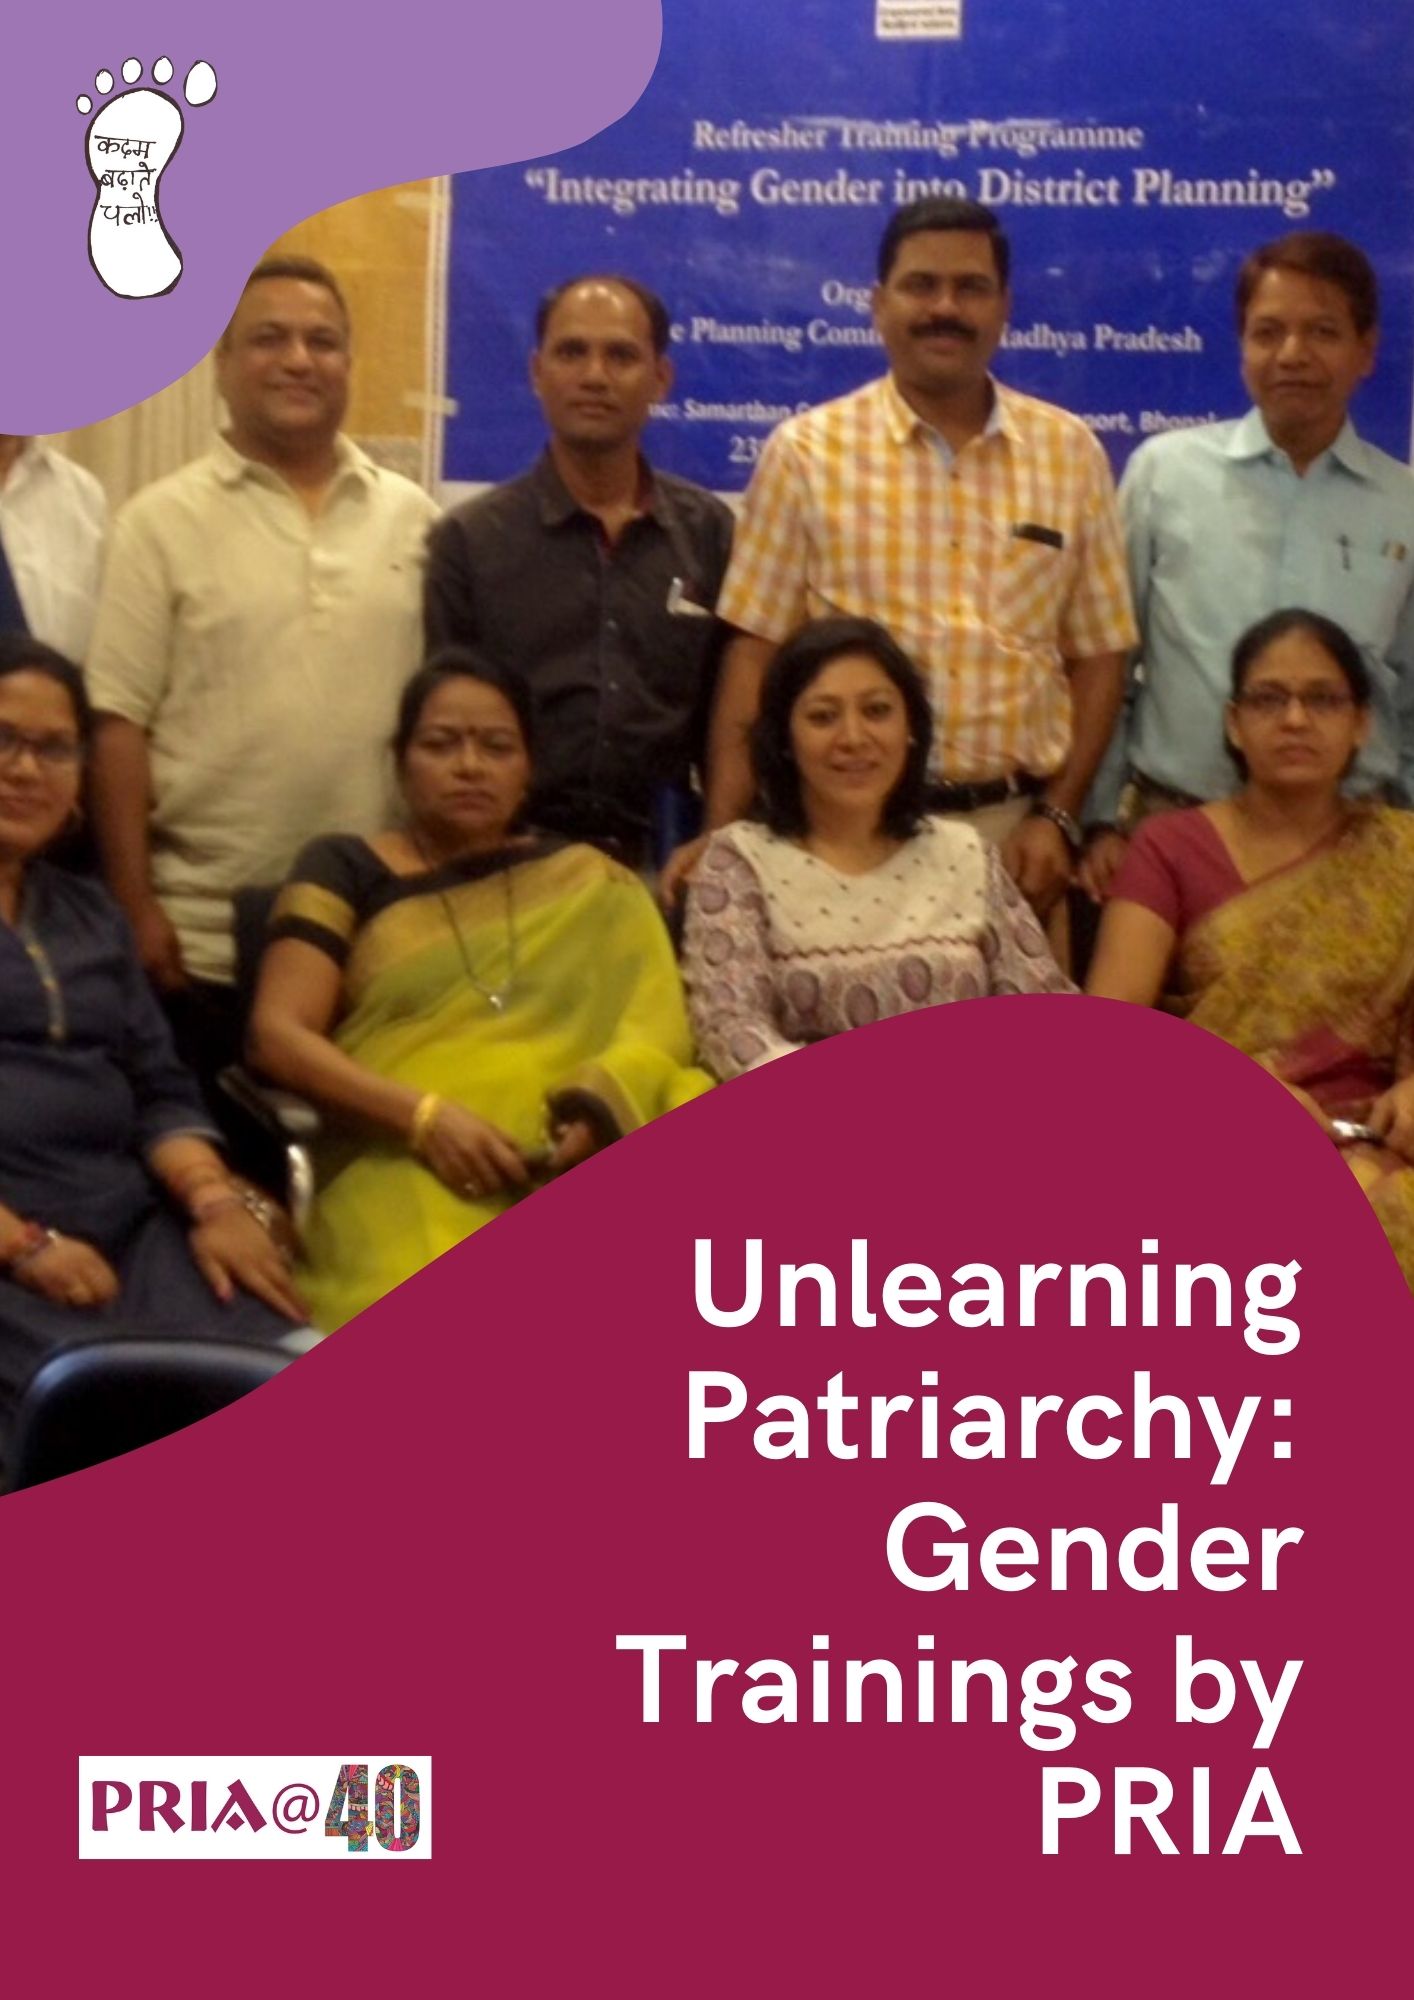 Unlearning Patriarchy: Gender Training by PRIA